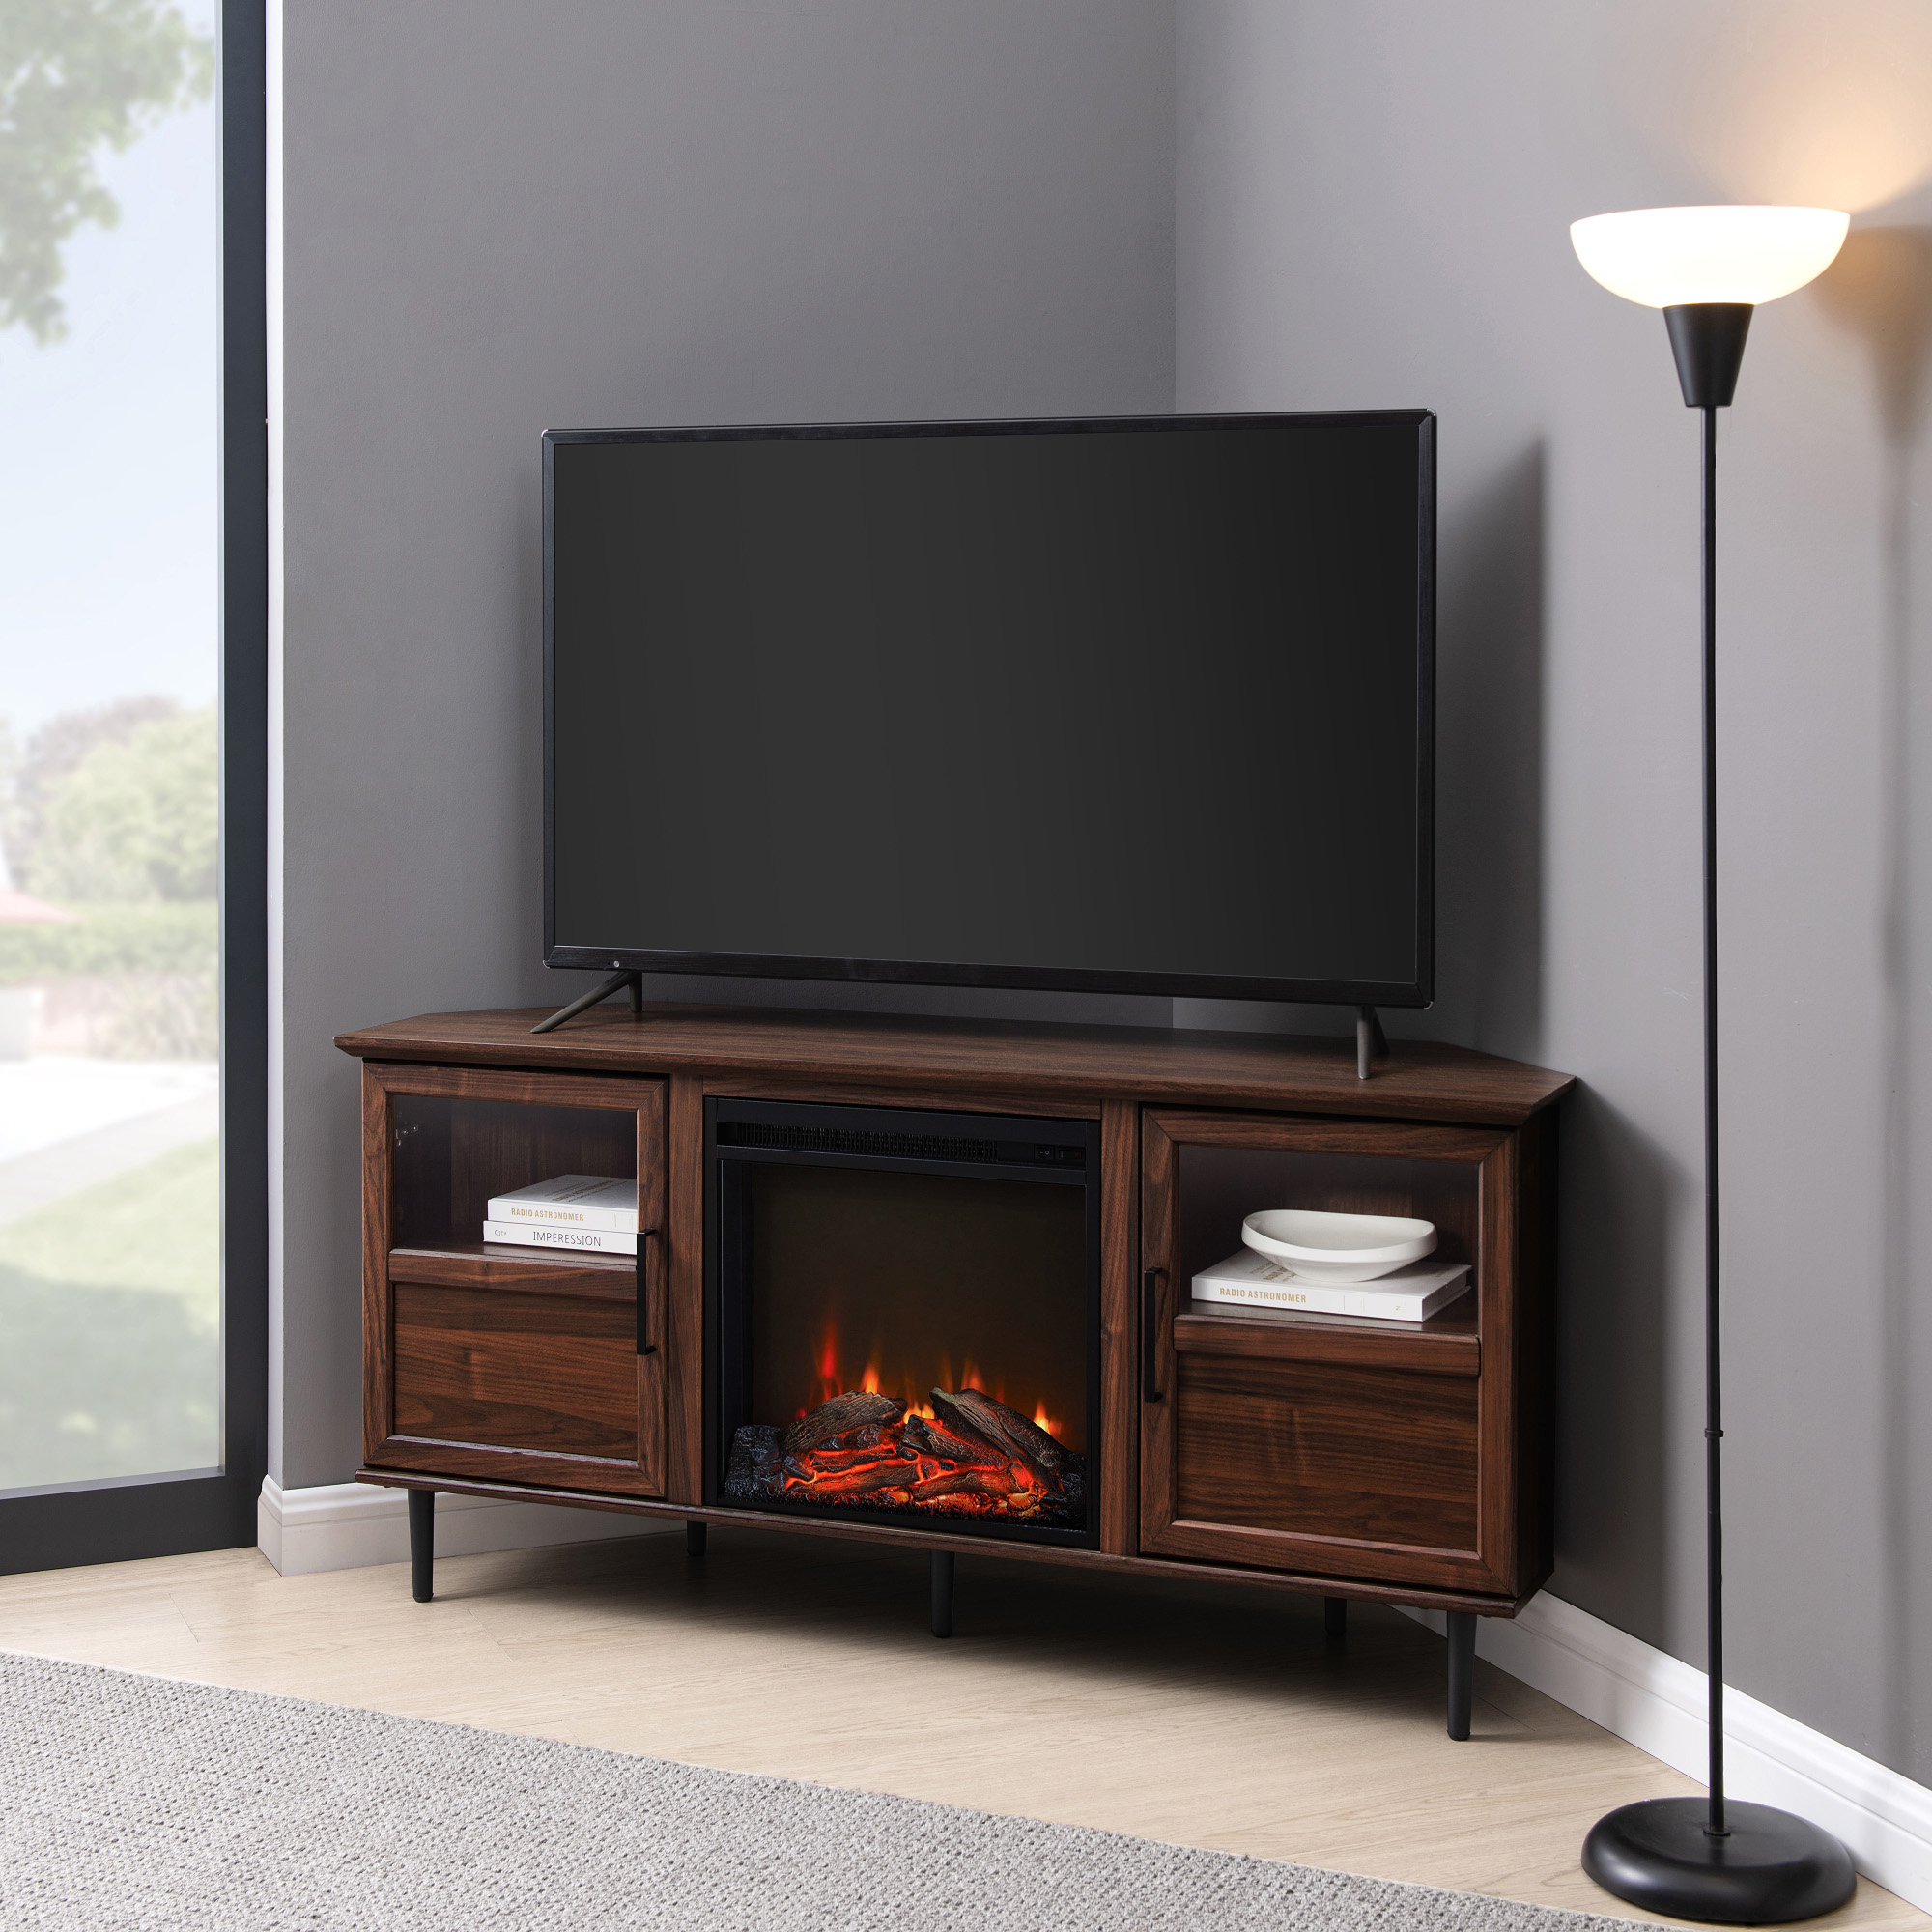 Walker Edison Panel Electric Fireplace Corner TV Stand for TVs up to 60”, Dark Walnut - image 1 of 11